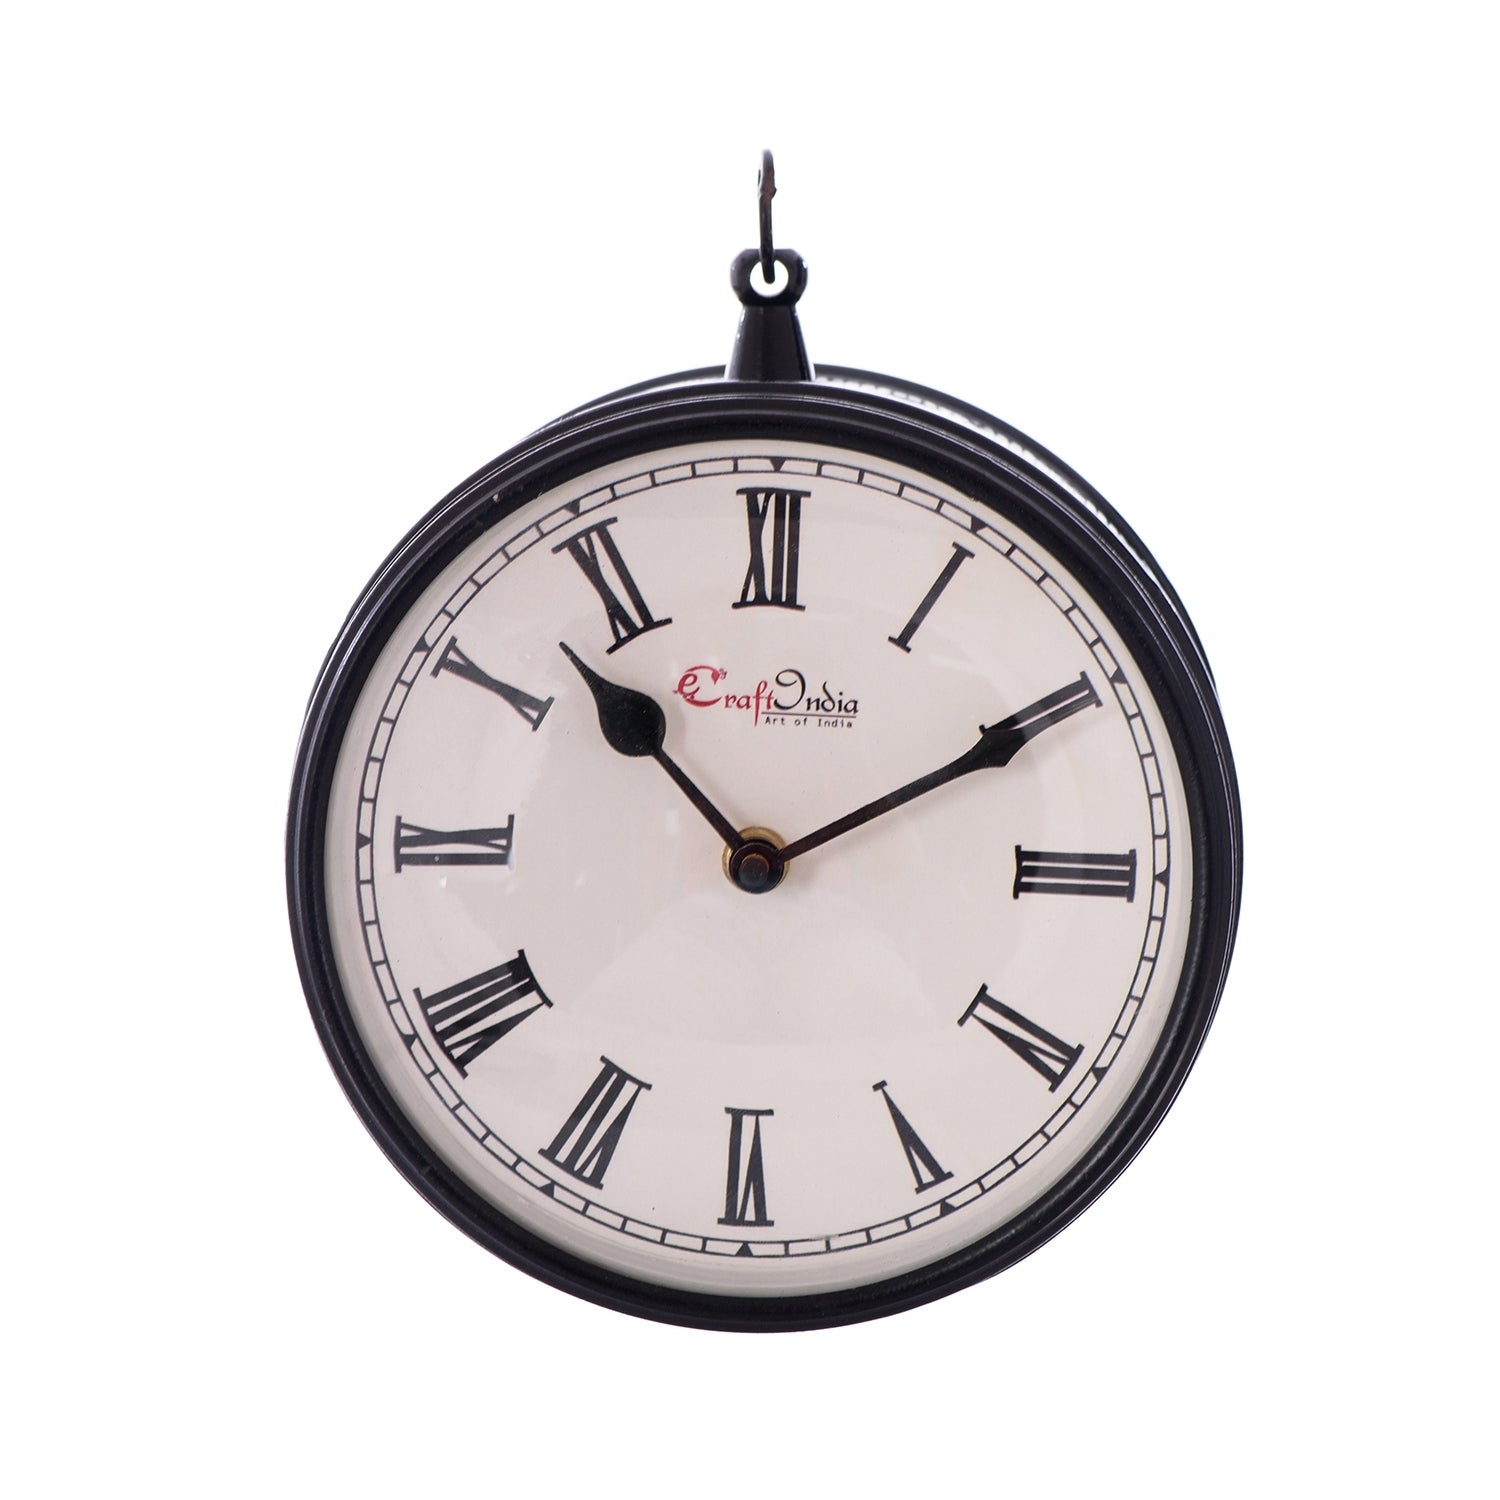 Handcrafted Antique & Vintage Station Wall Clock (Dual View - Dial Size 8 Inch) - Black Color 2